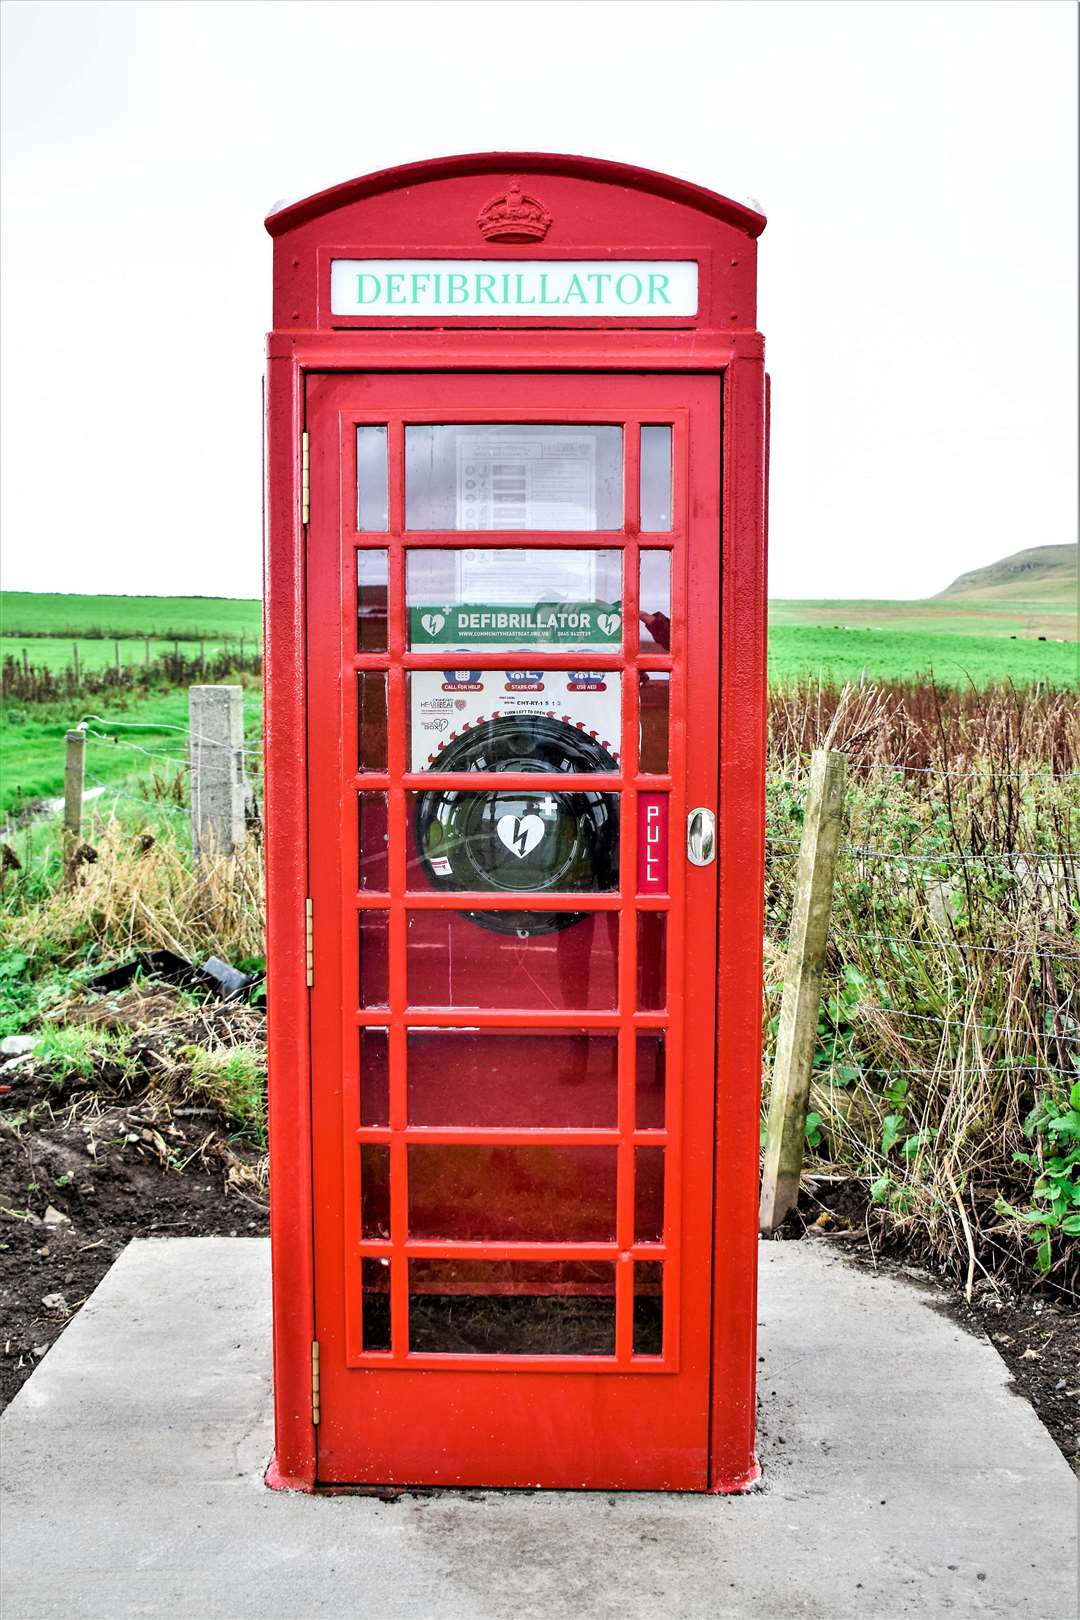 This phone box has been altered to home a defibrillator.